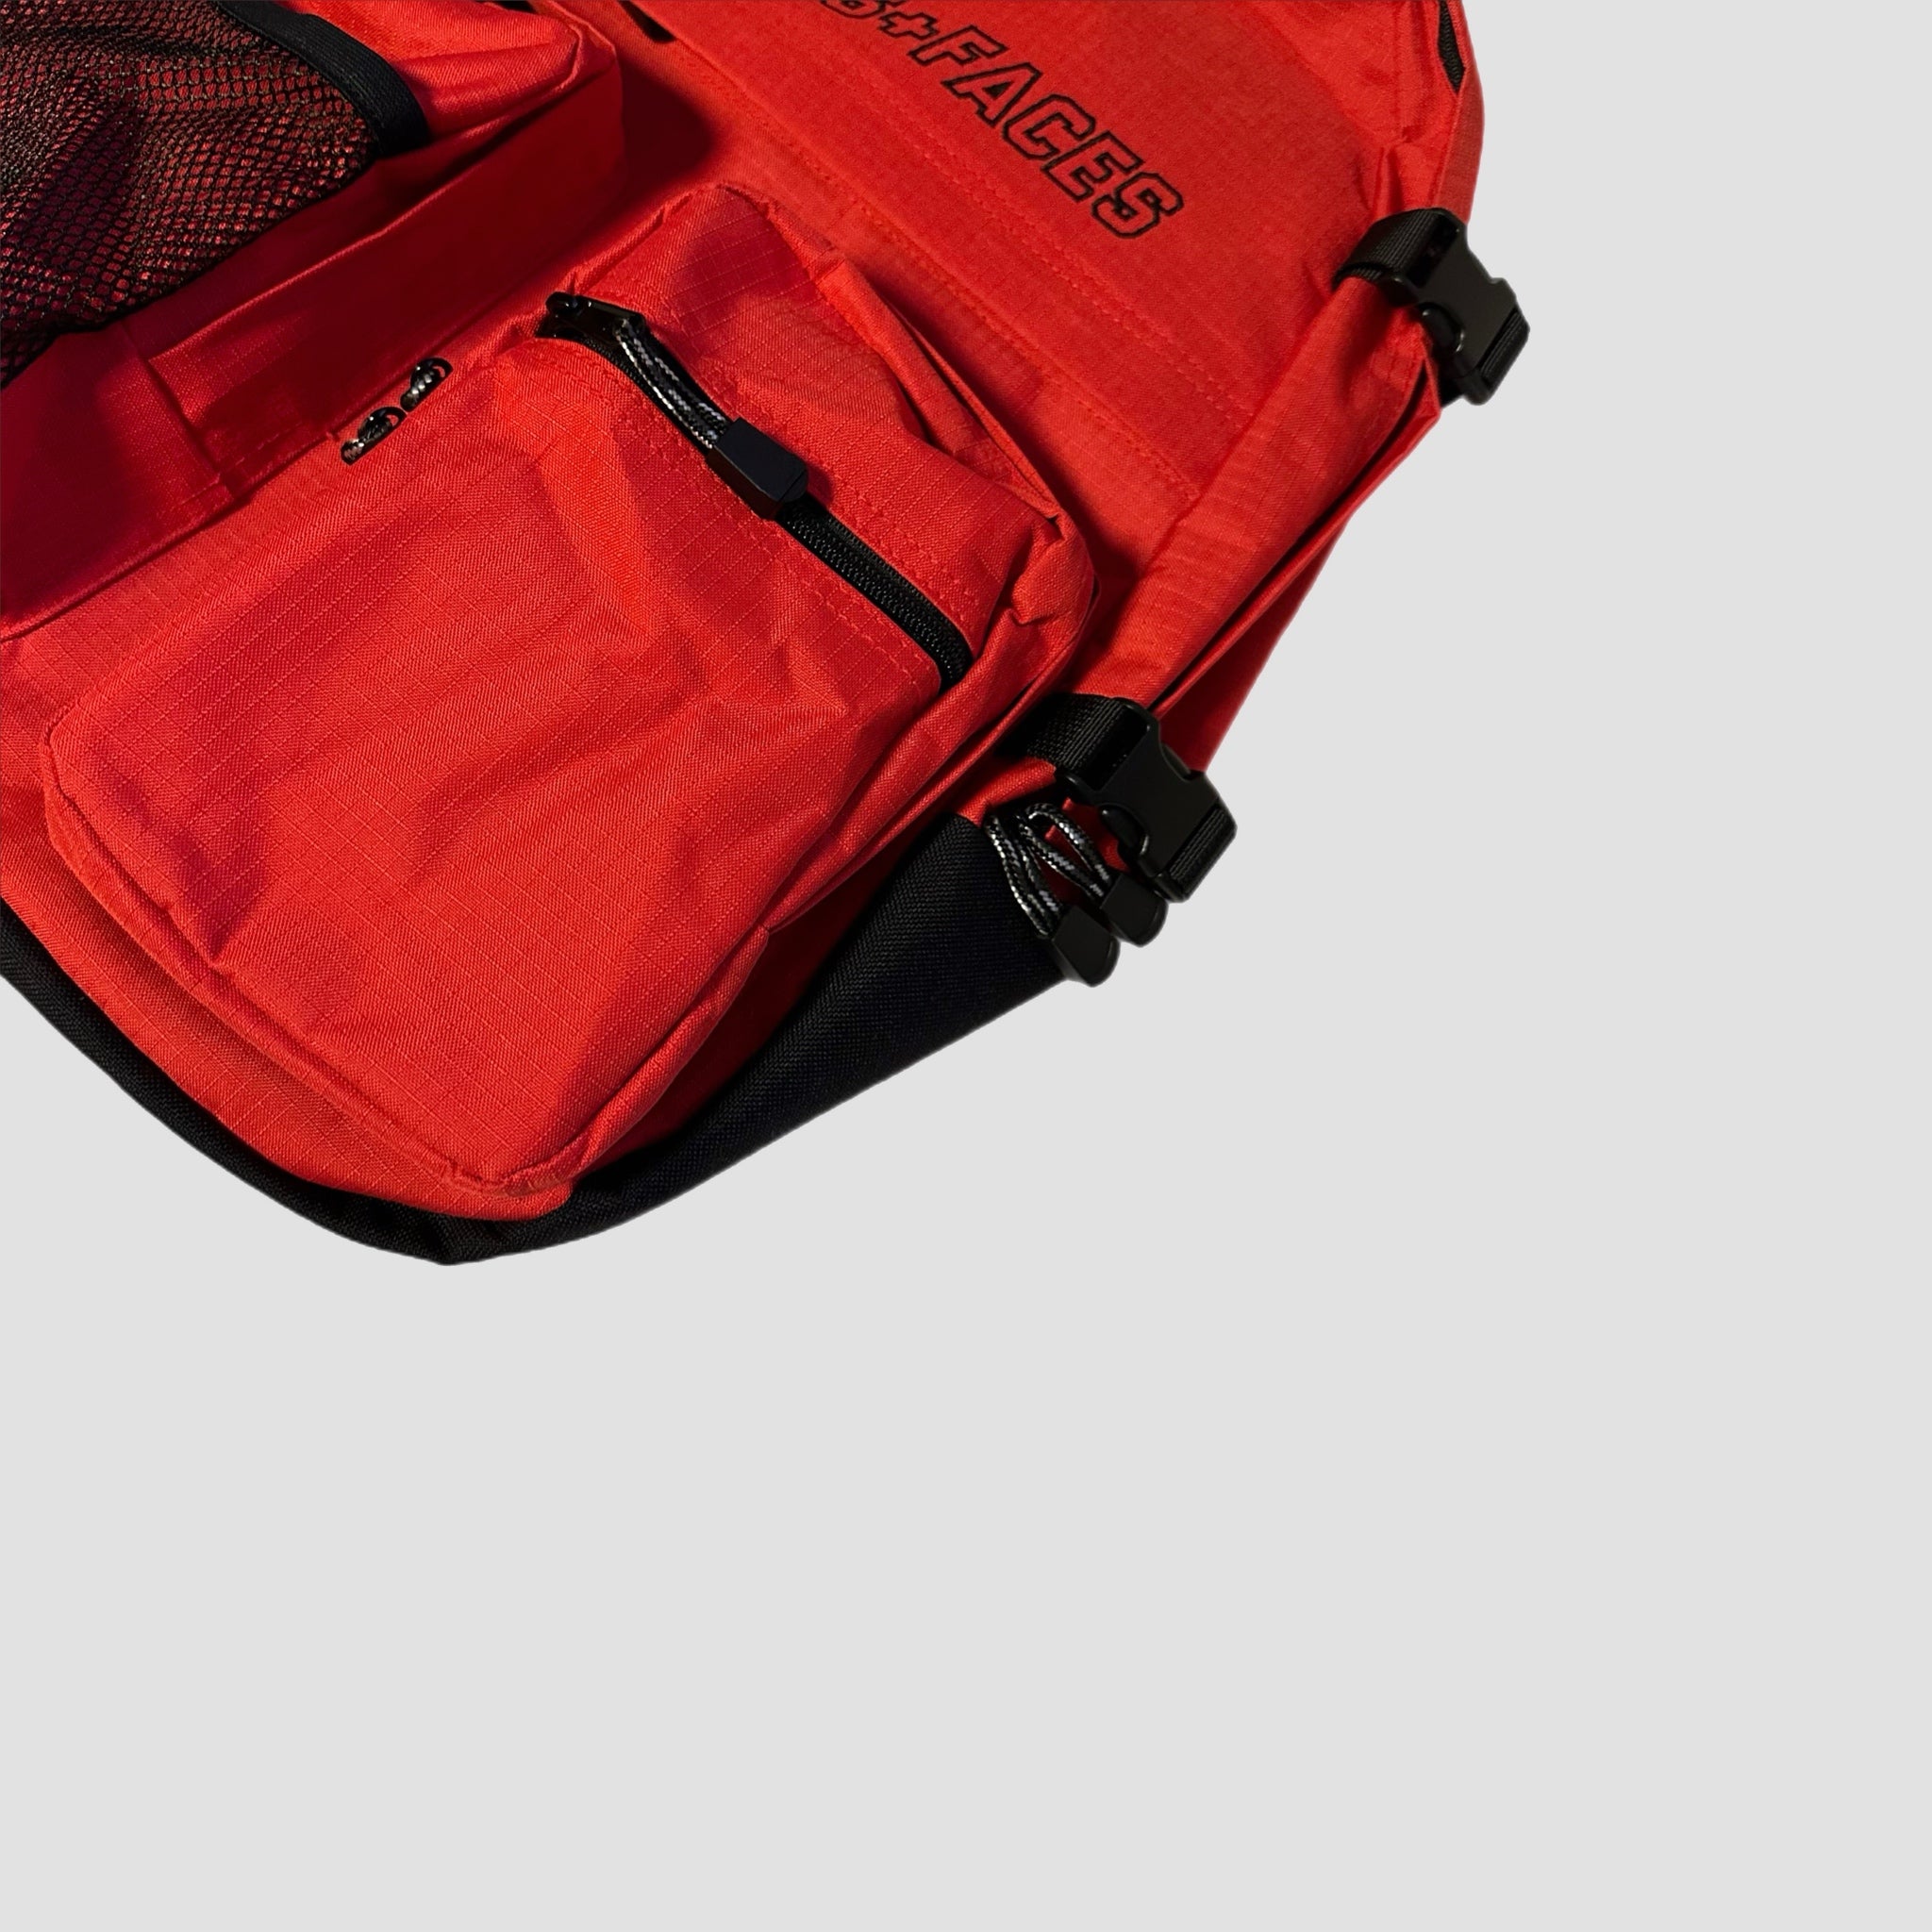 Places + Faces Cordura Backpack